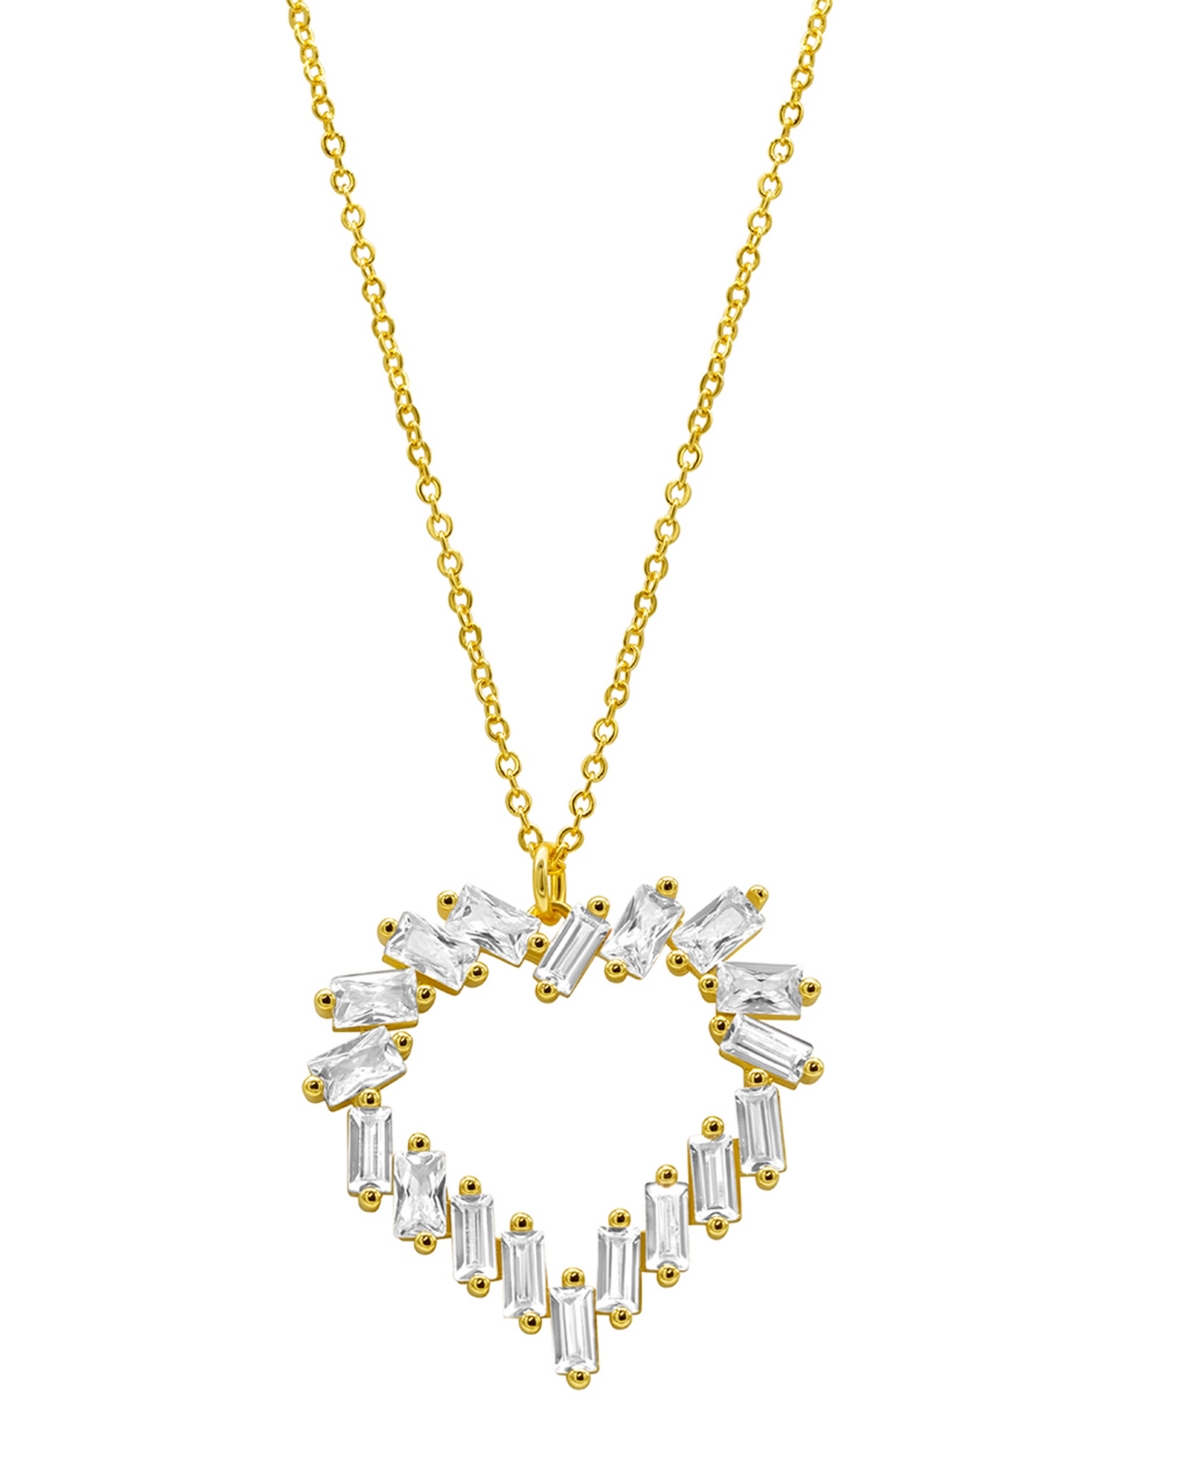 14K Gold-Plated Crystal Baguette Heart Pendant Necklace - Gold